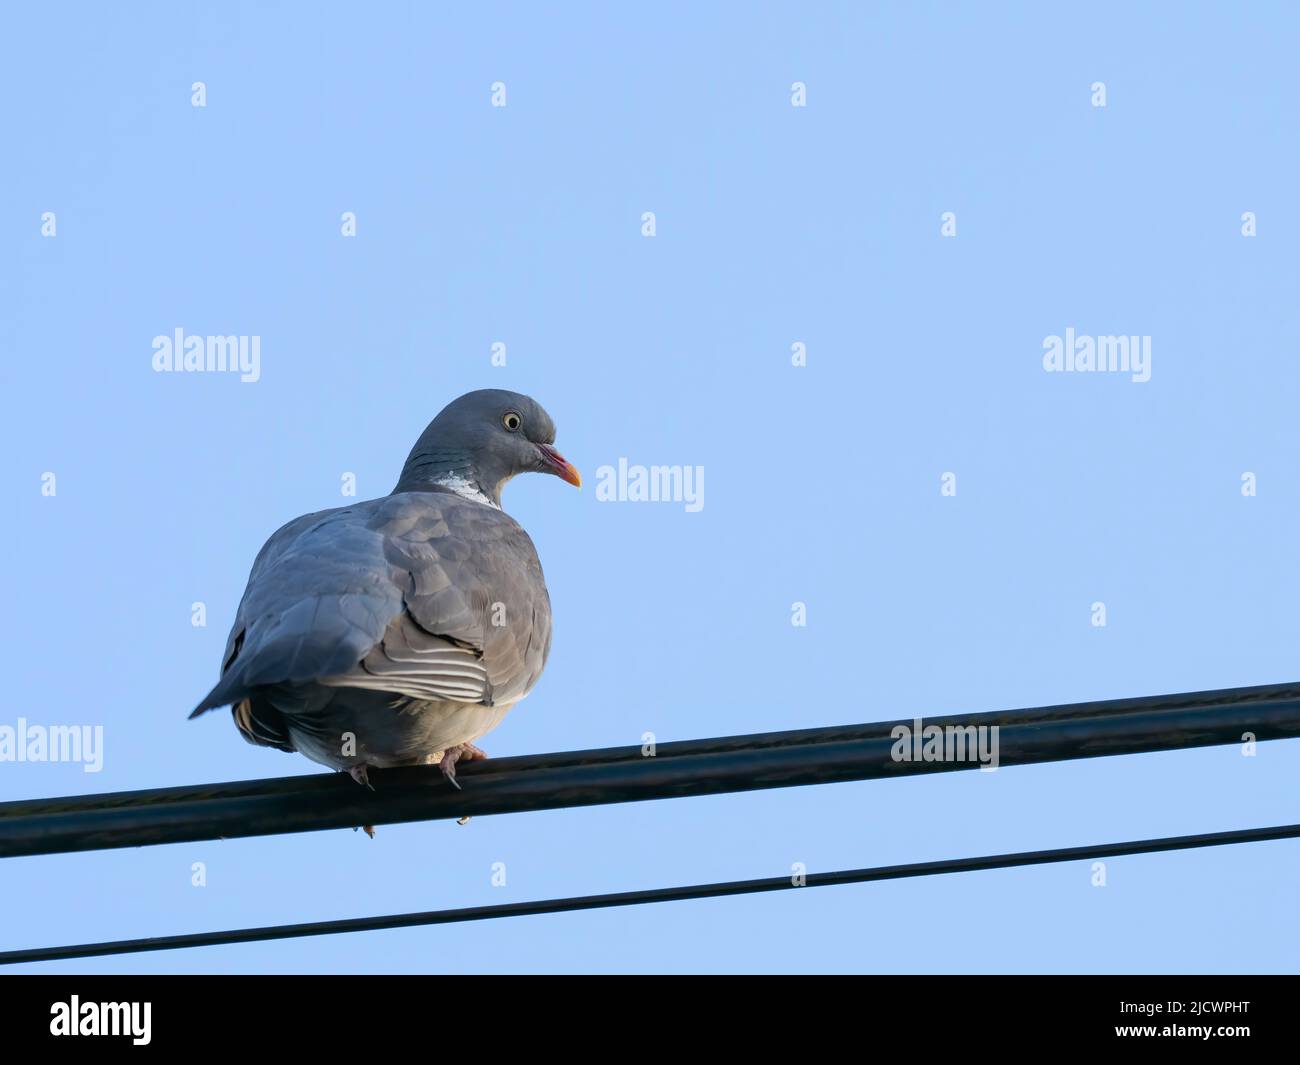 A Common Woodpigeon (Columba palumbus), also known as Wood Pigeon, perched on a power cable in Blackpool, Lancashire, UK Stock Photo